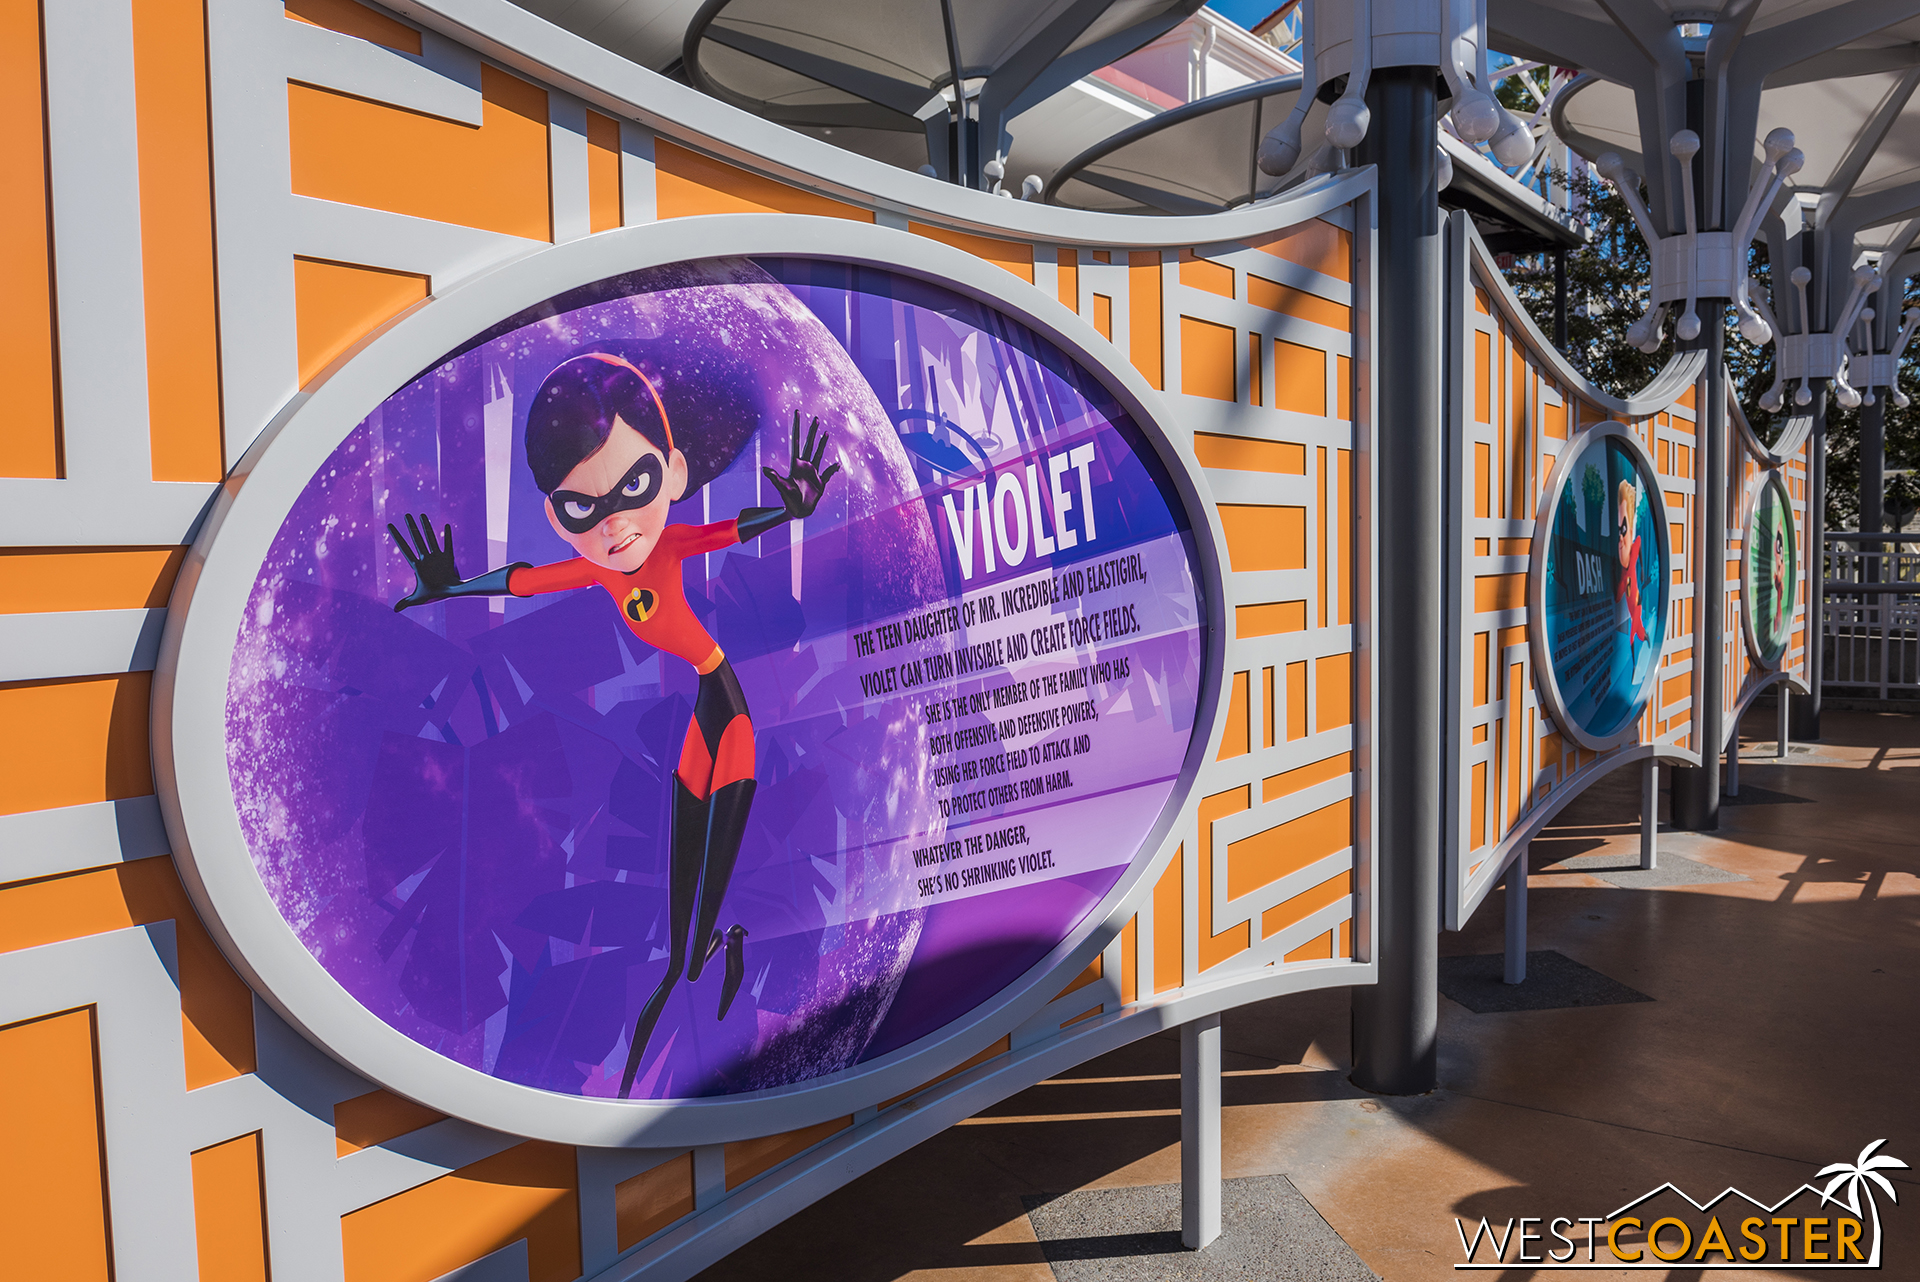  Going in the standby line for The Incredicoaster, guests can read a variety of graphics about the Incredibles. 